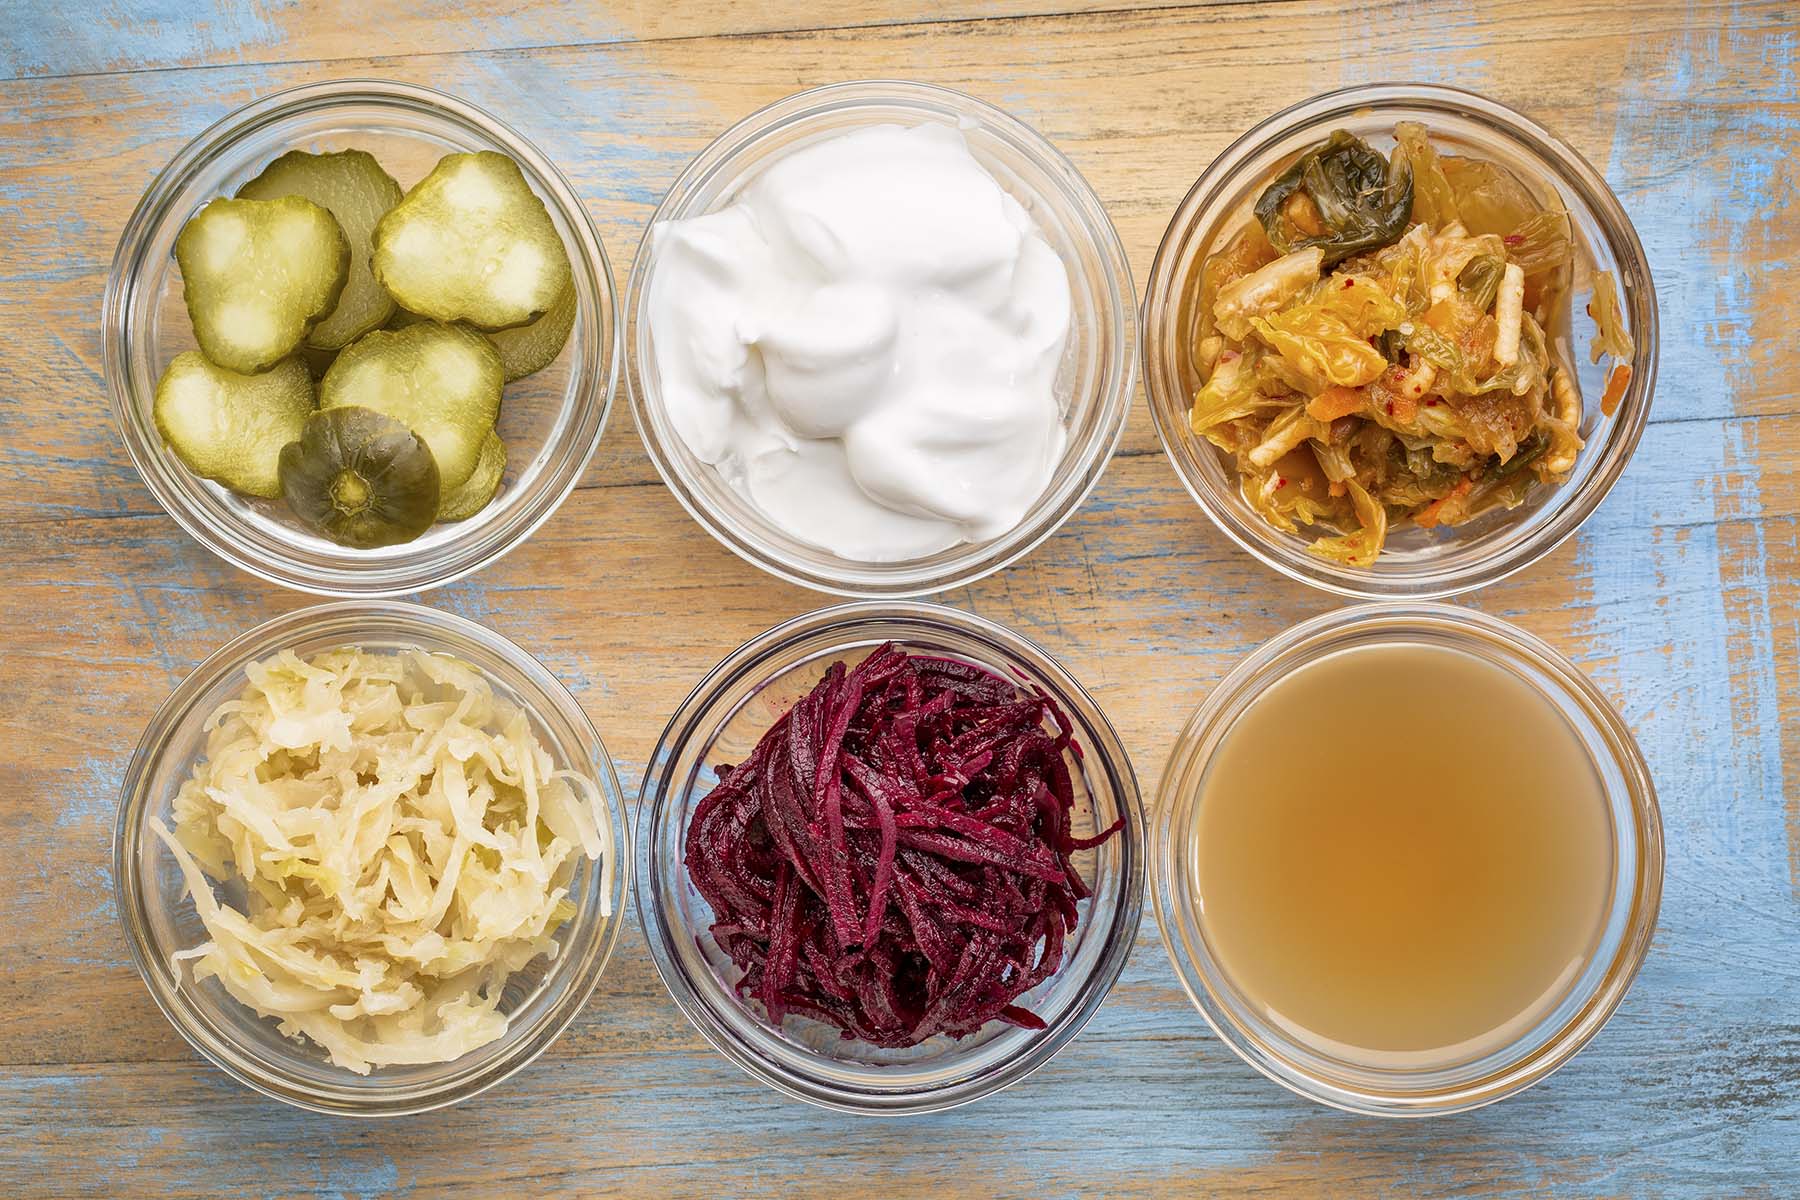 The Health Benefits Of Fermented Foods